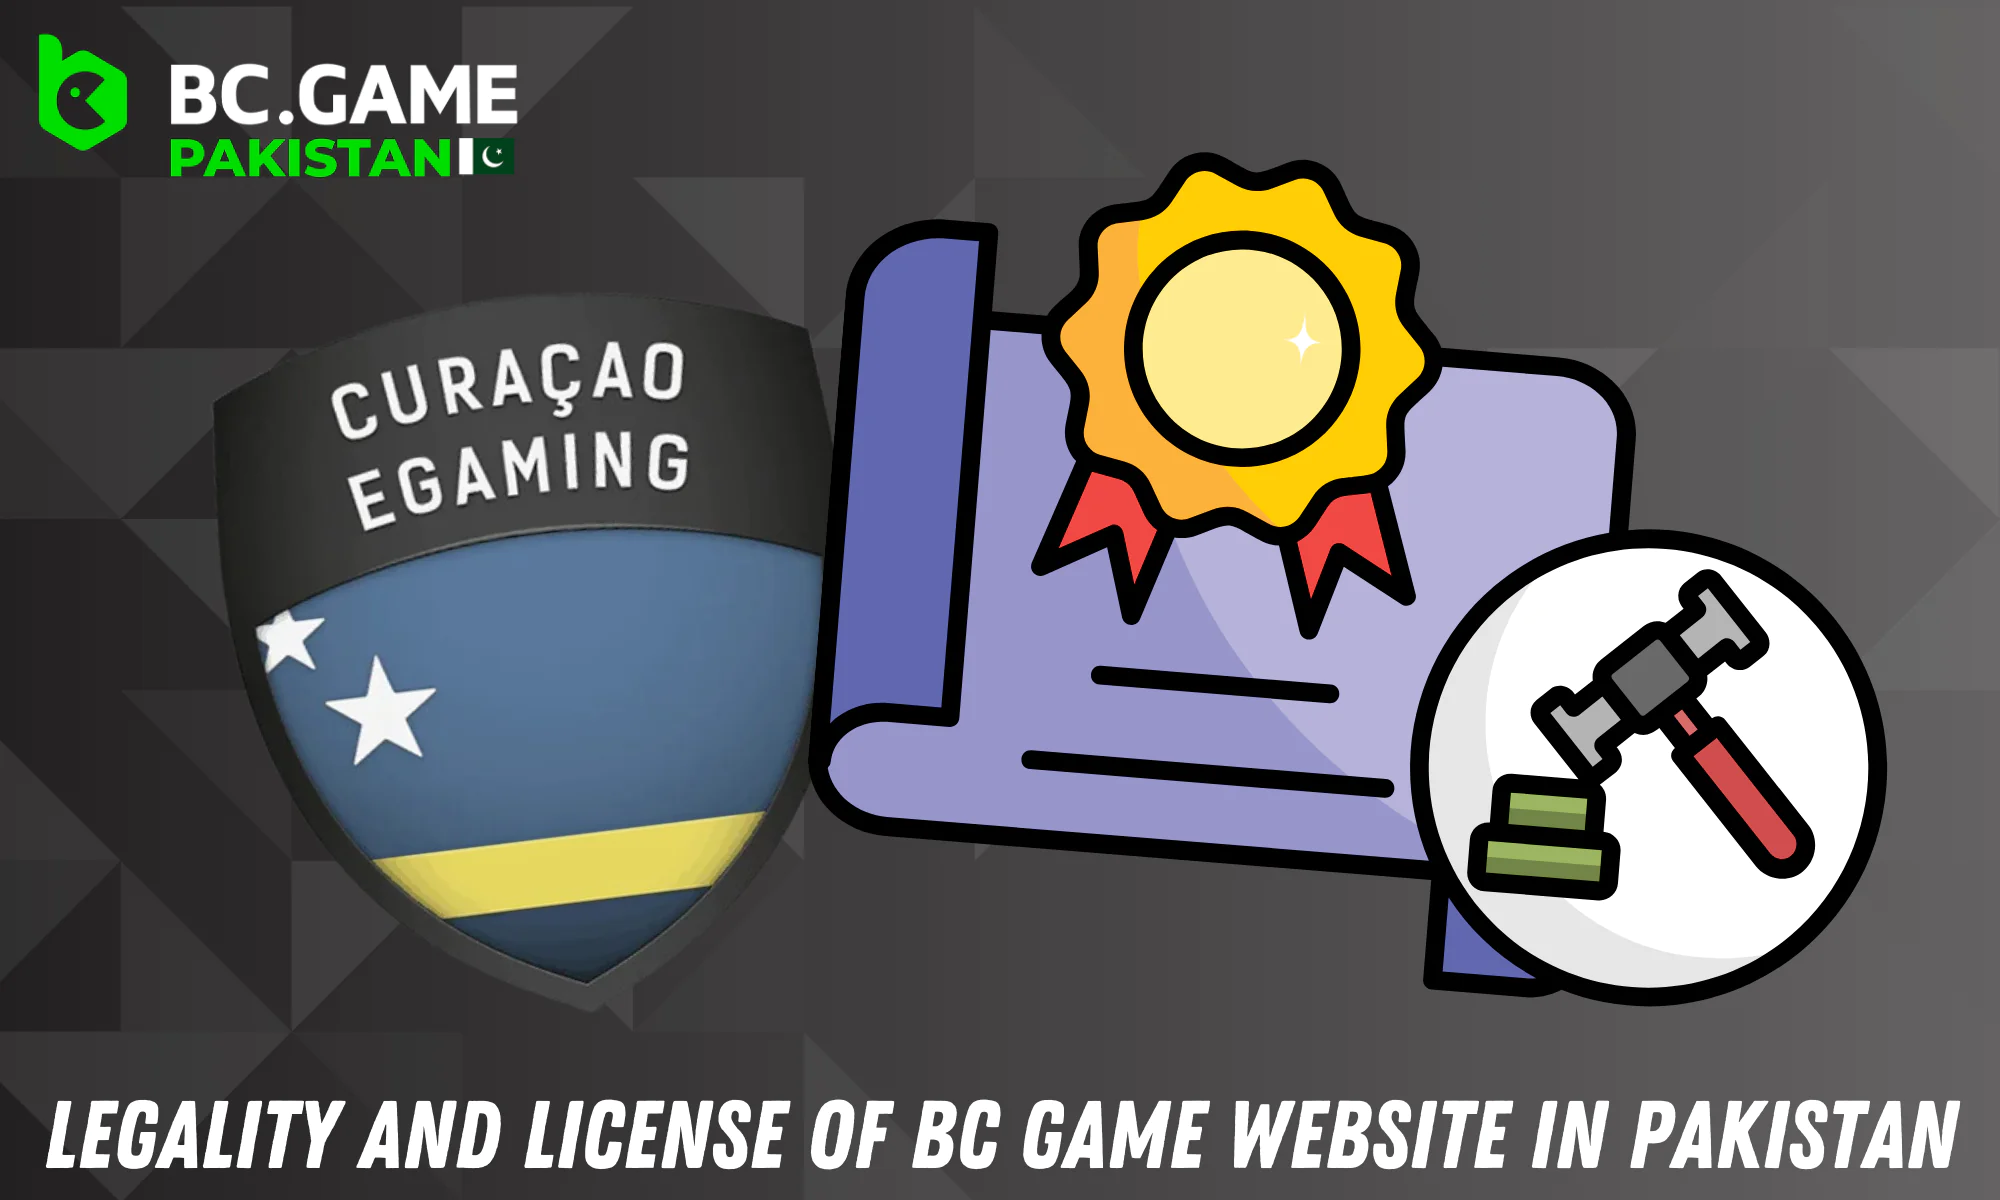 BC Game in Pakistan is licensed and operates in accordance with all laws